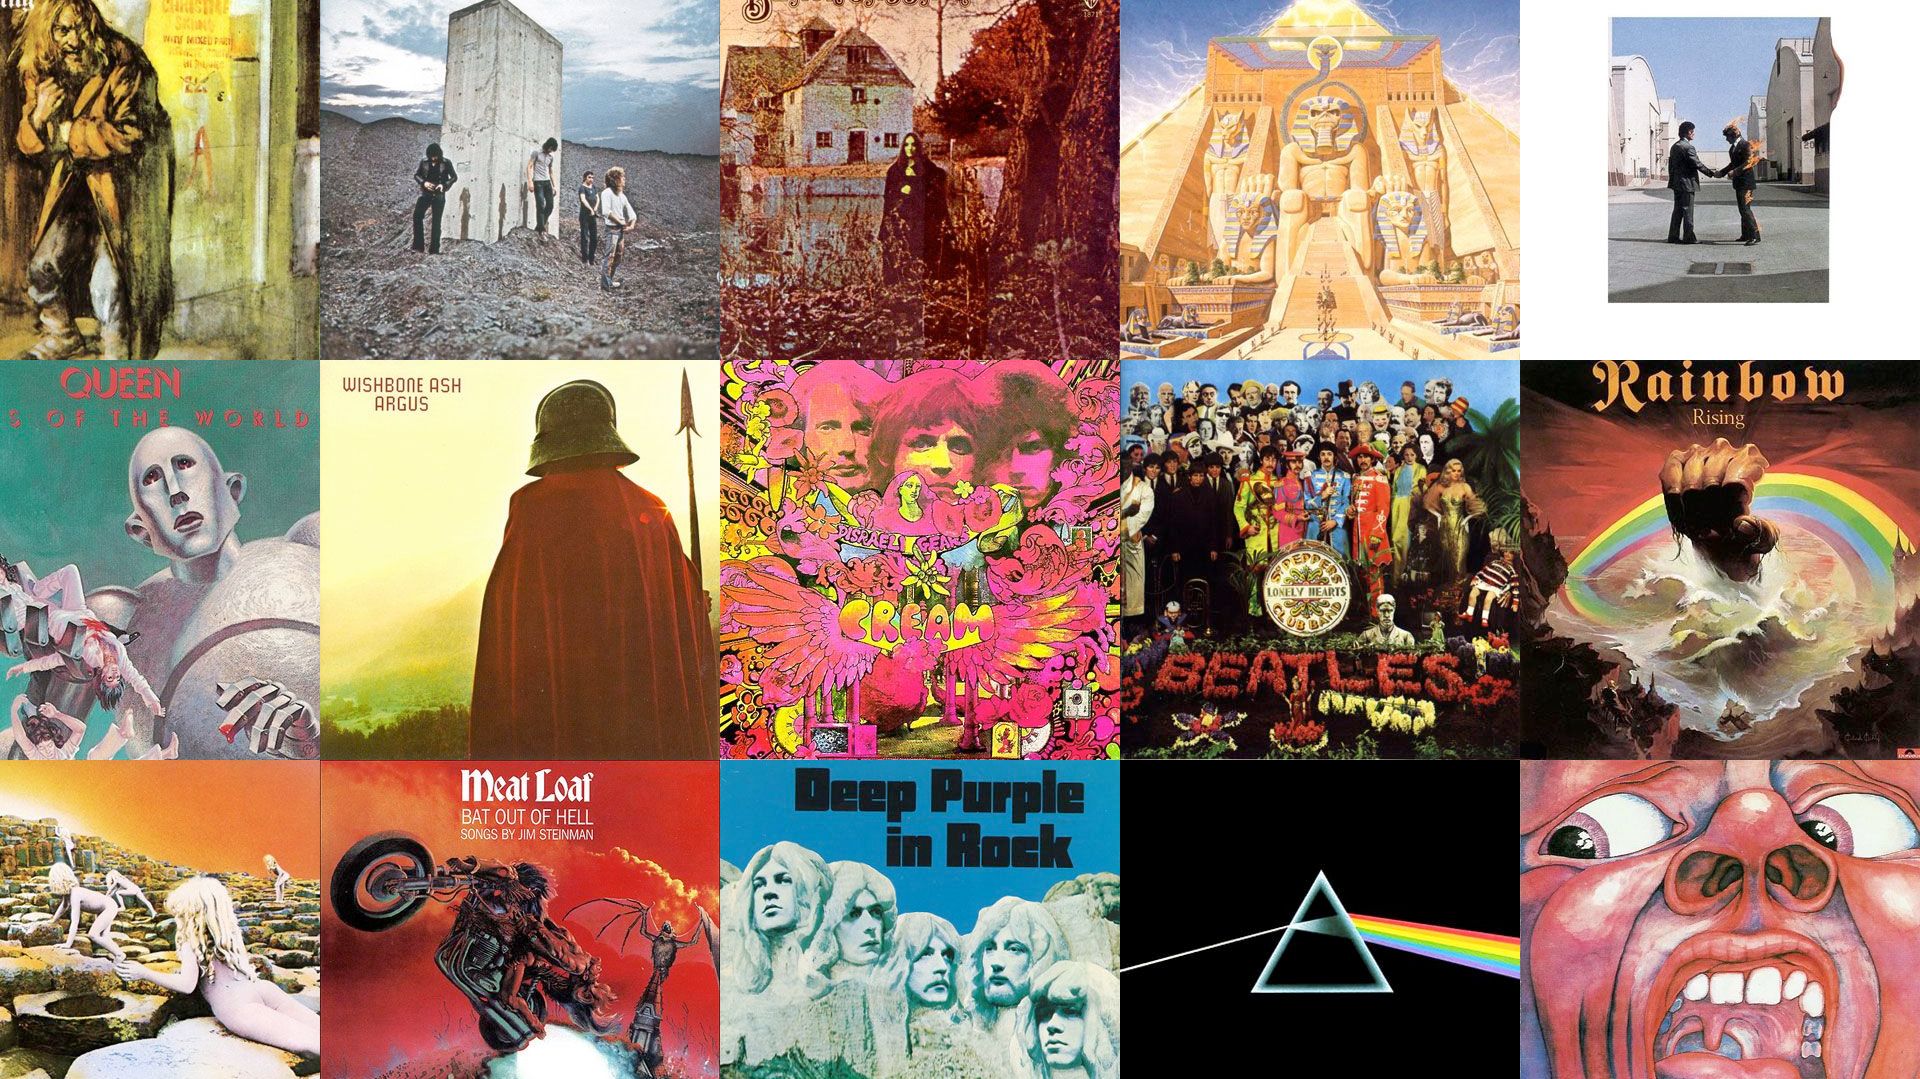 Vote for the greatest album cover of all time